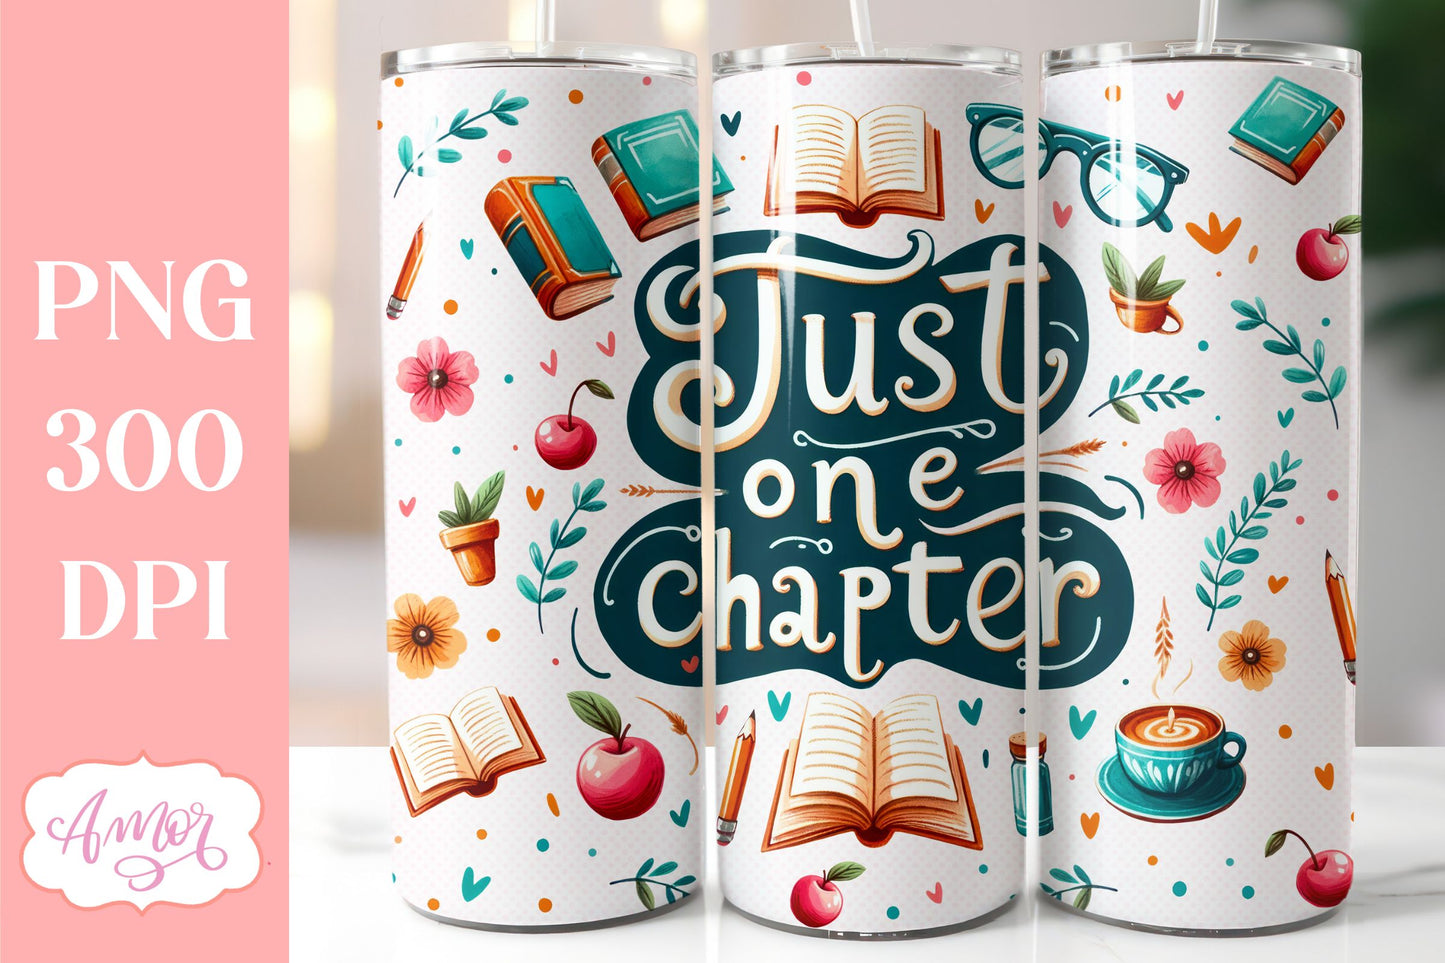 Book lover tumbler wrap sublimation PNG | Just one chapter